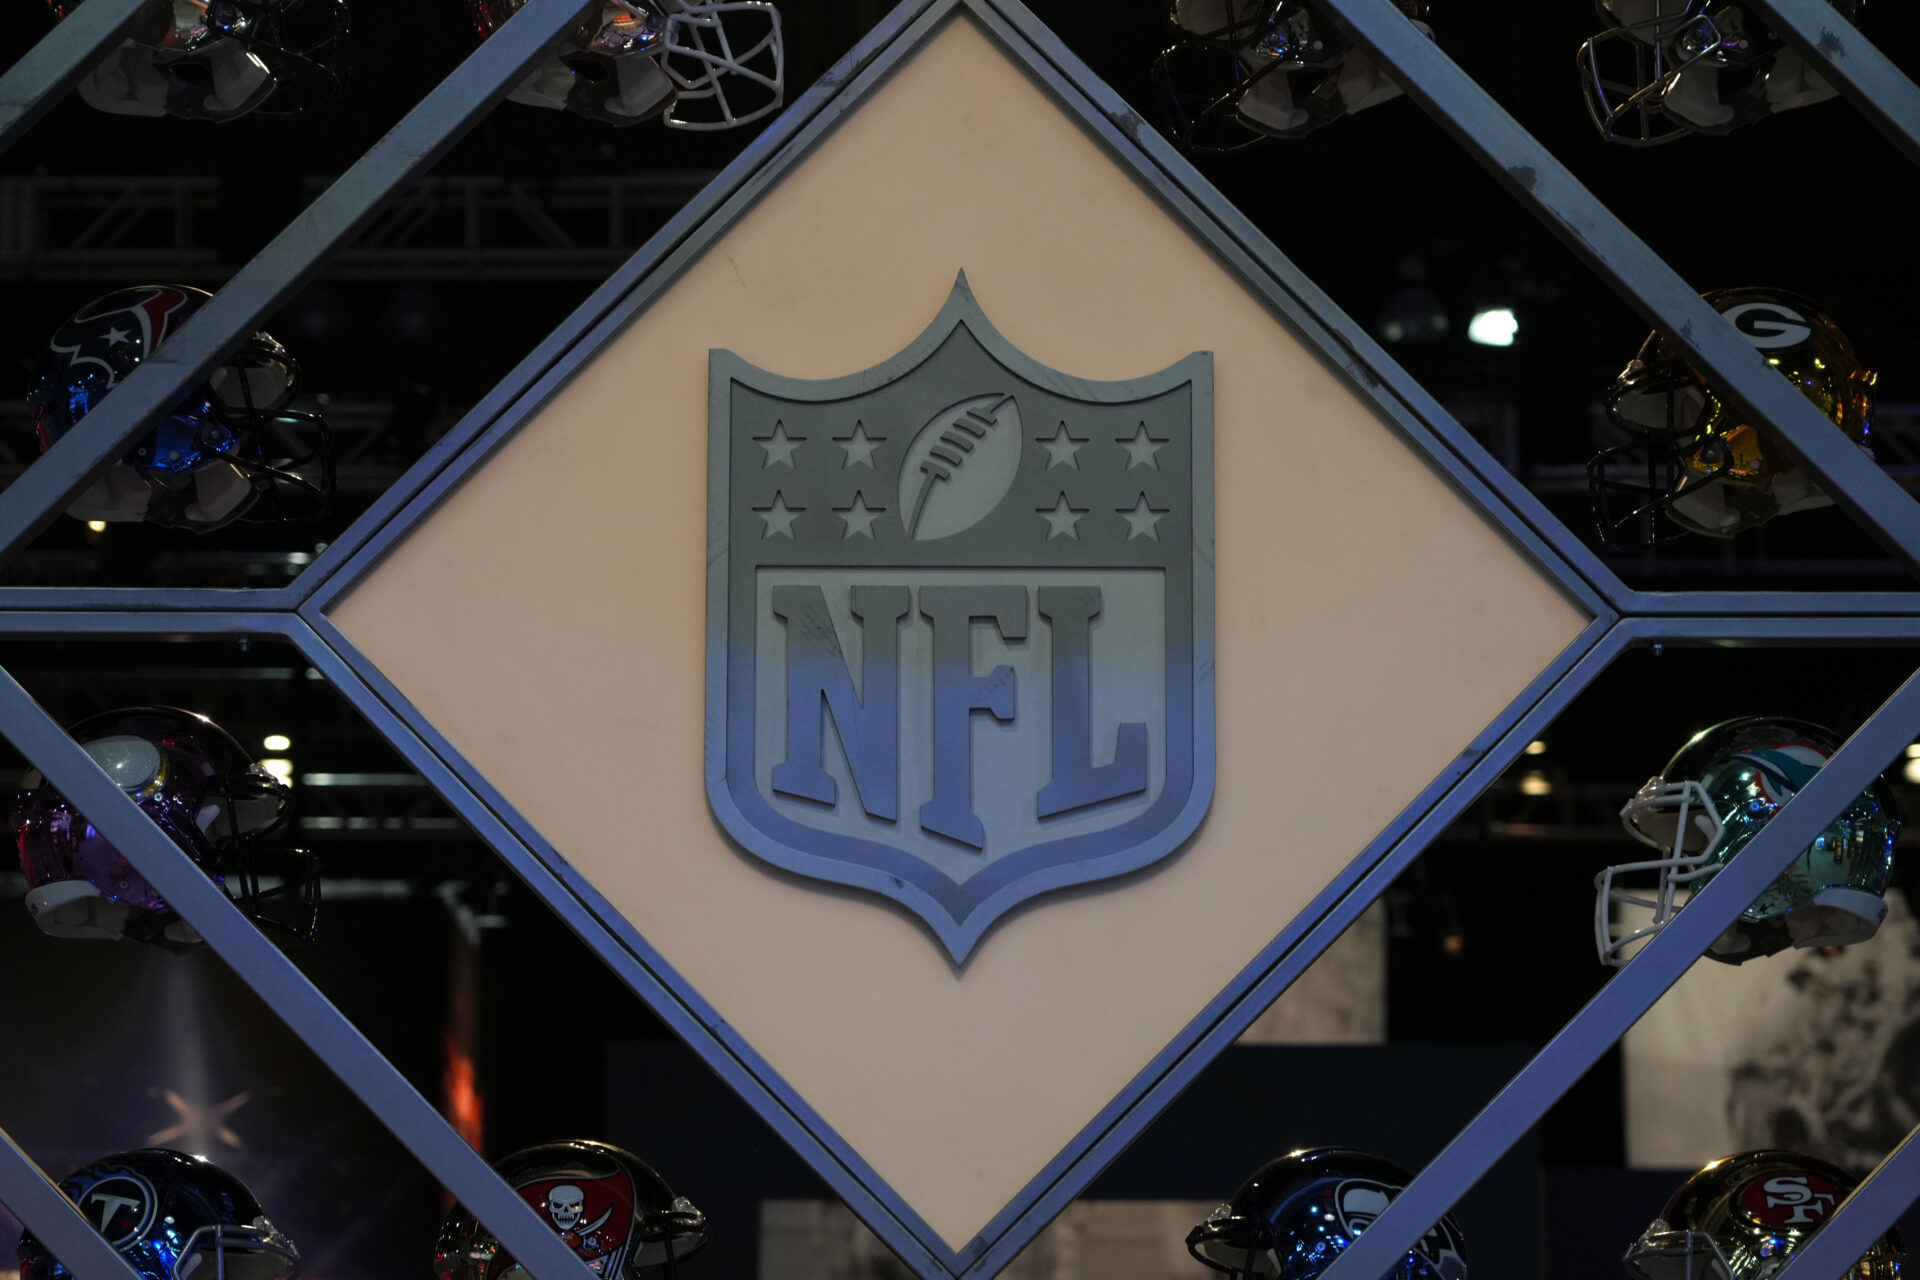 The NFL Shield logo is seen at the Super Bowl LVI Experience at the Los Angeles Convention Center.